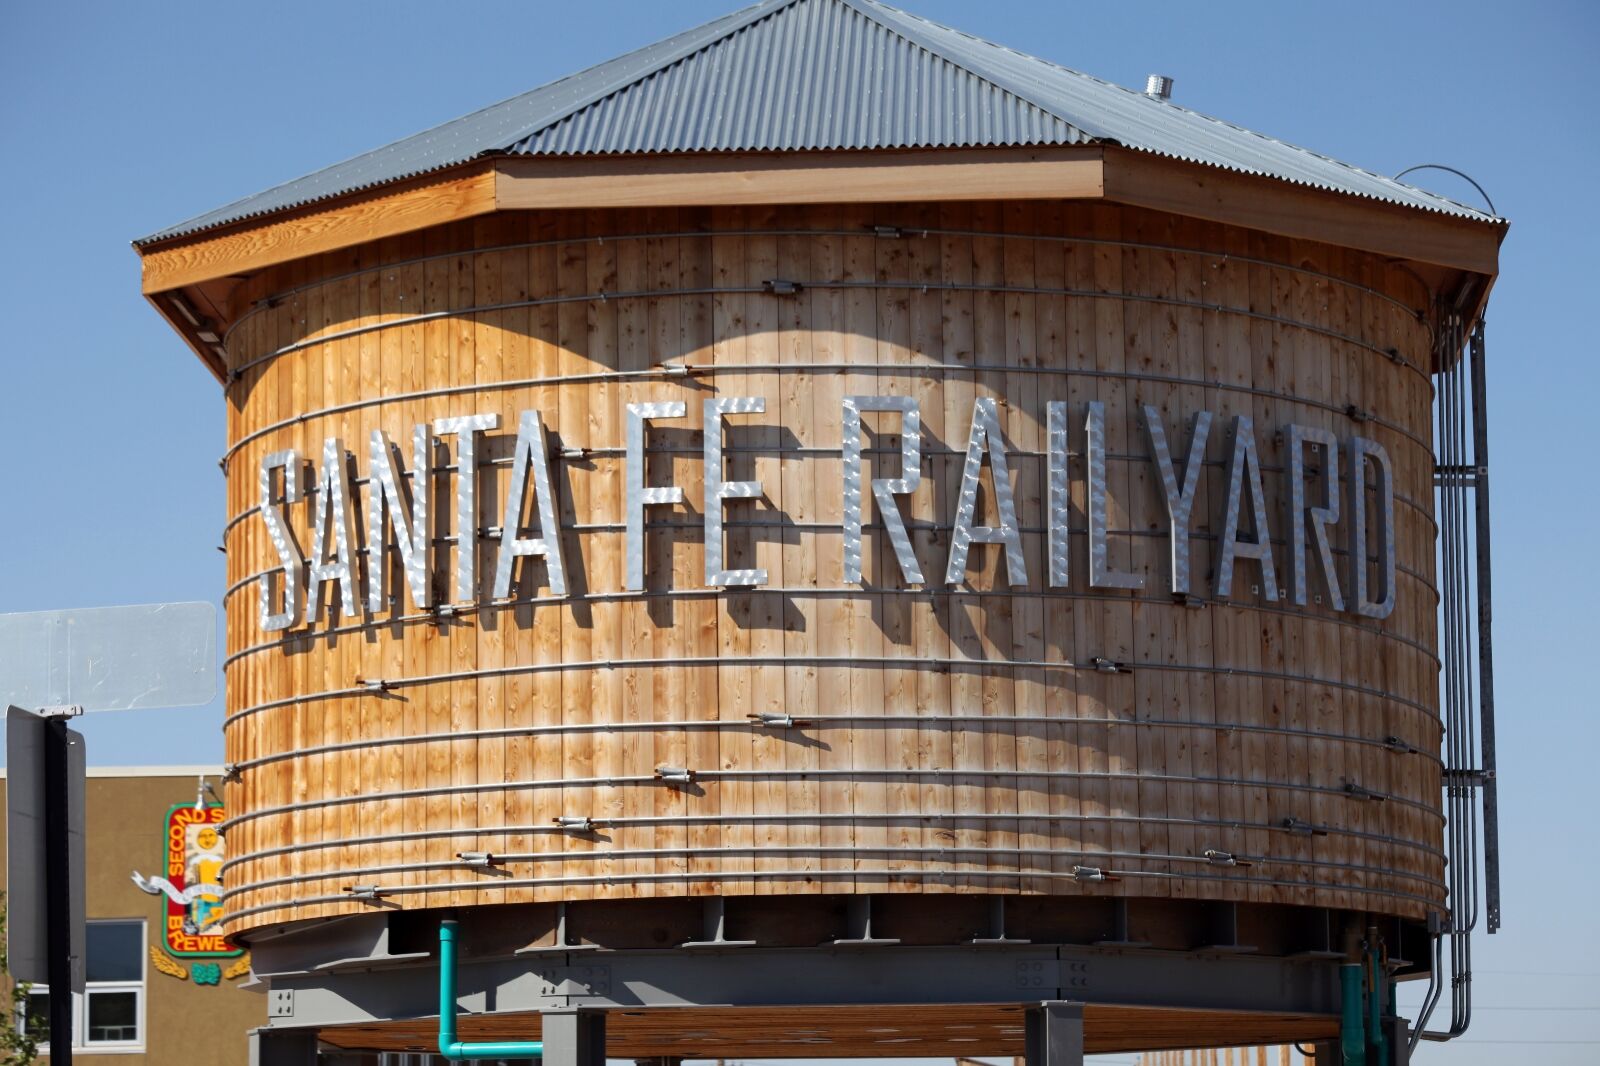 Santa Fe Railyard is a fun thing to do with kids 